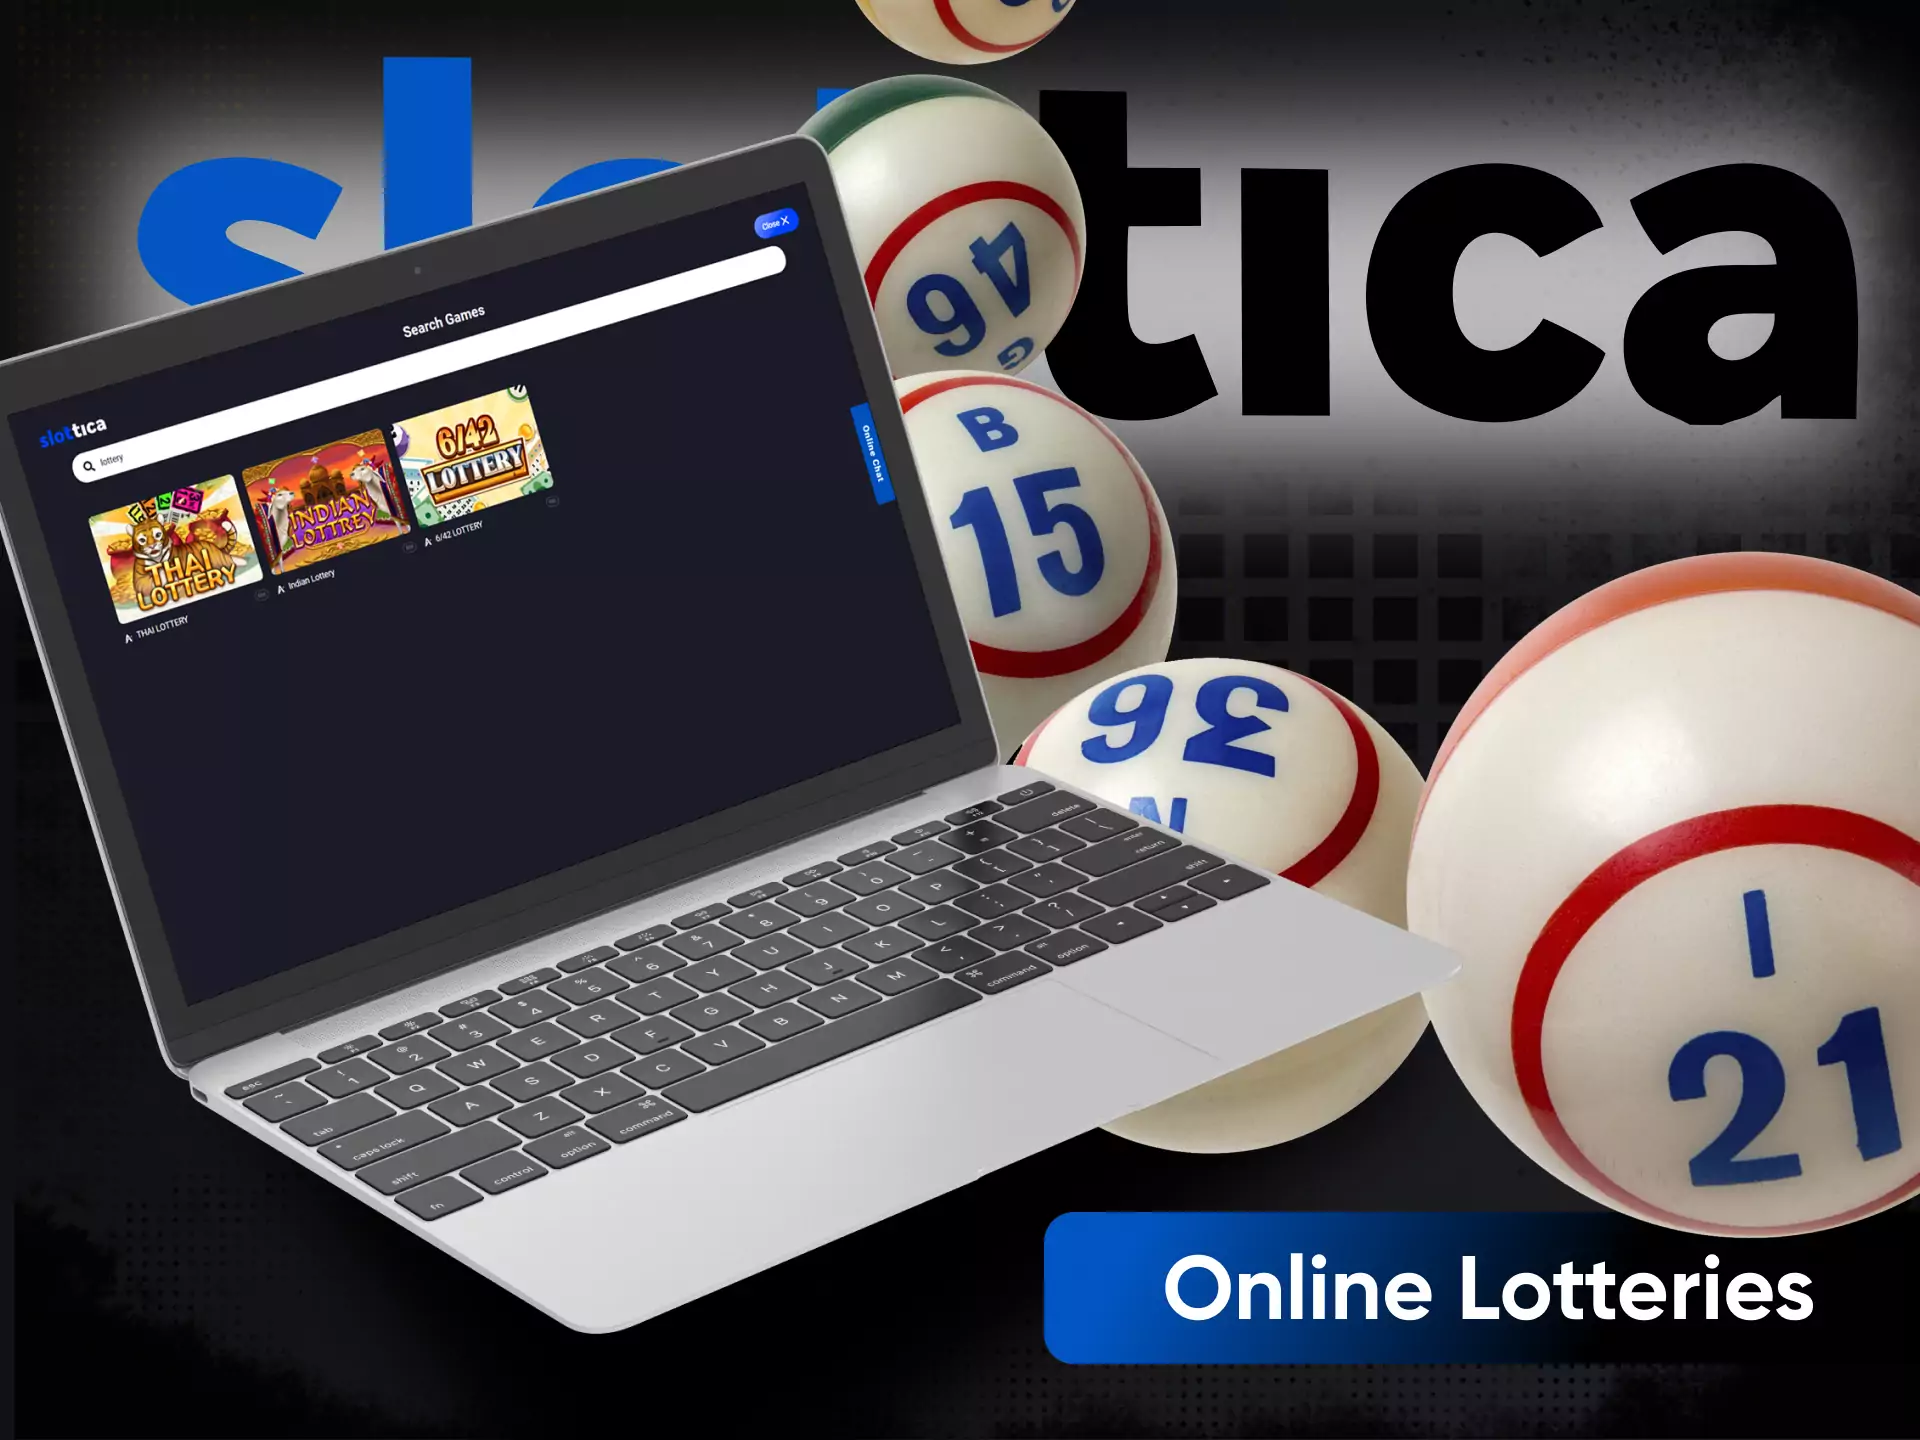 Besides betting and casino, you can buy lottery tickets on Slottica.